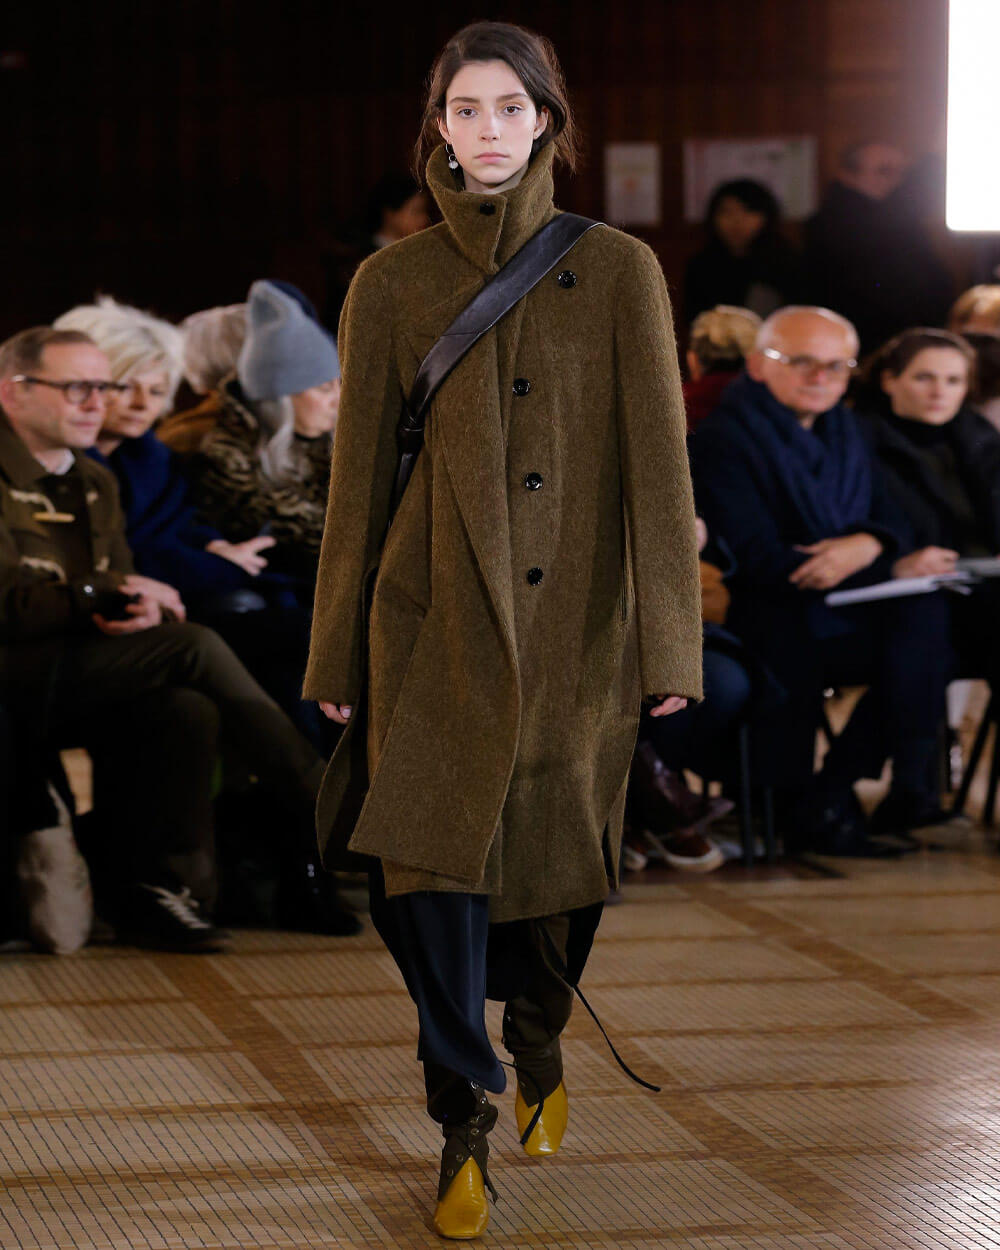 Lemaire Dark Academia look - Fall 2018 Ready-to-Wear Collection